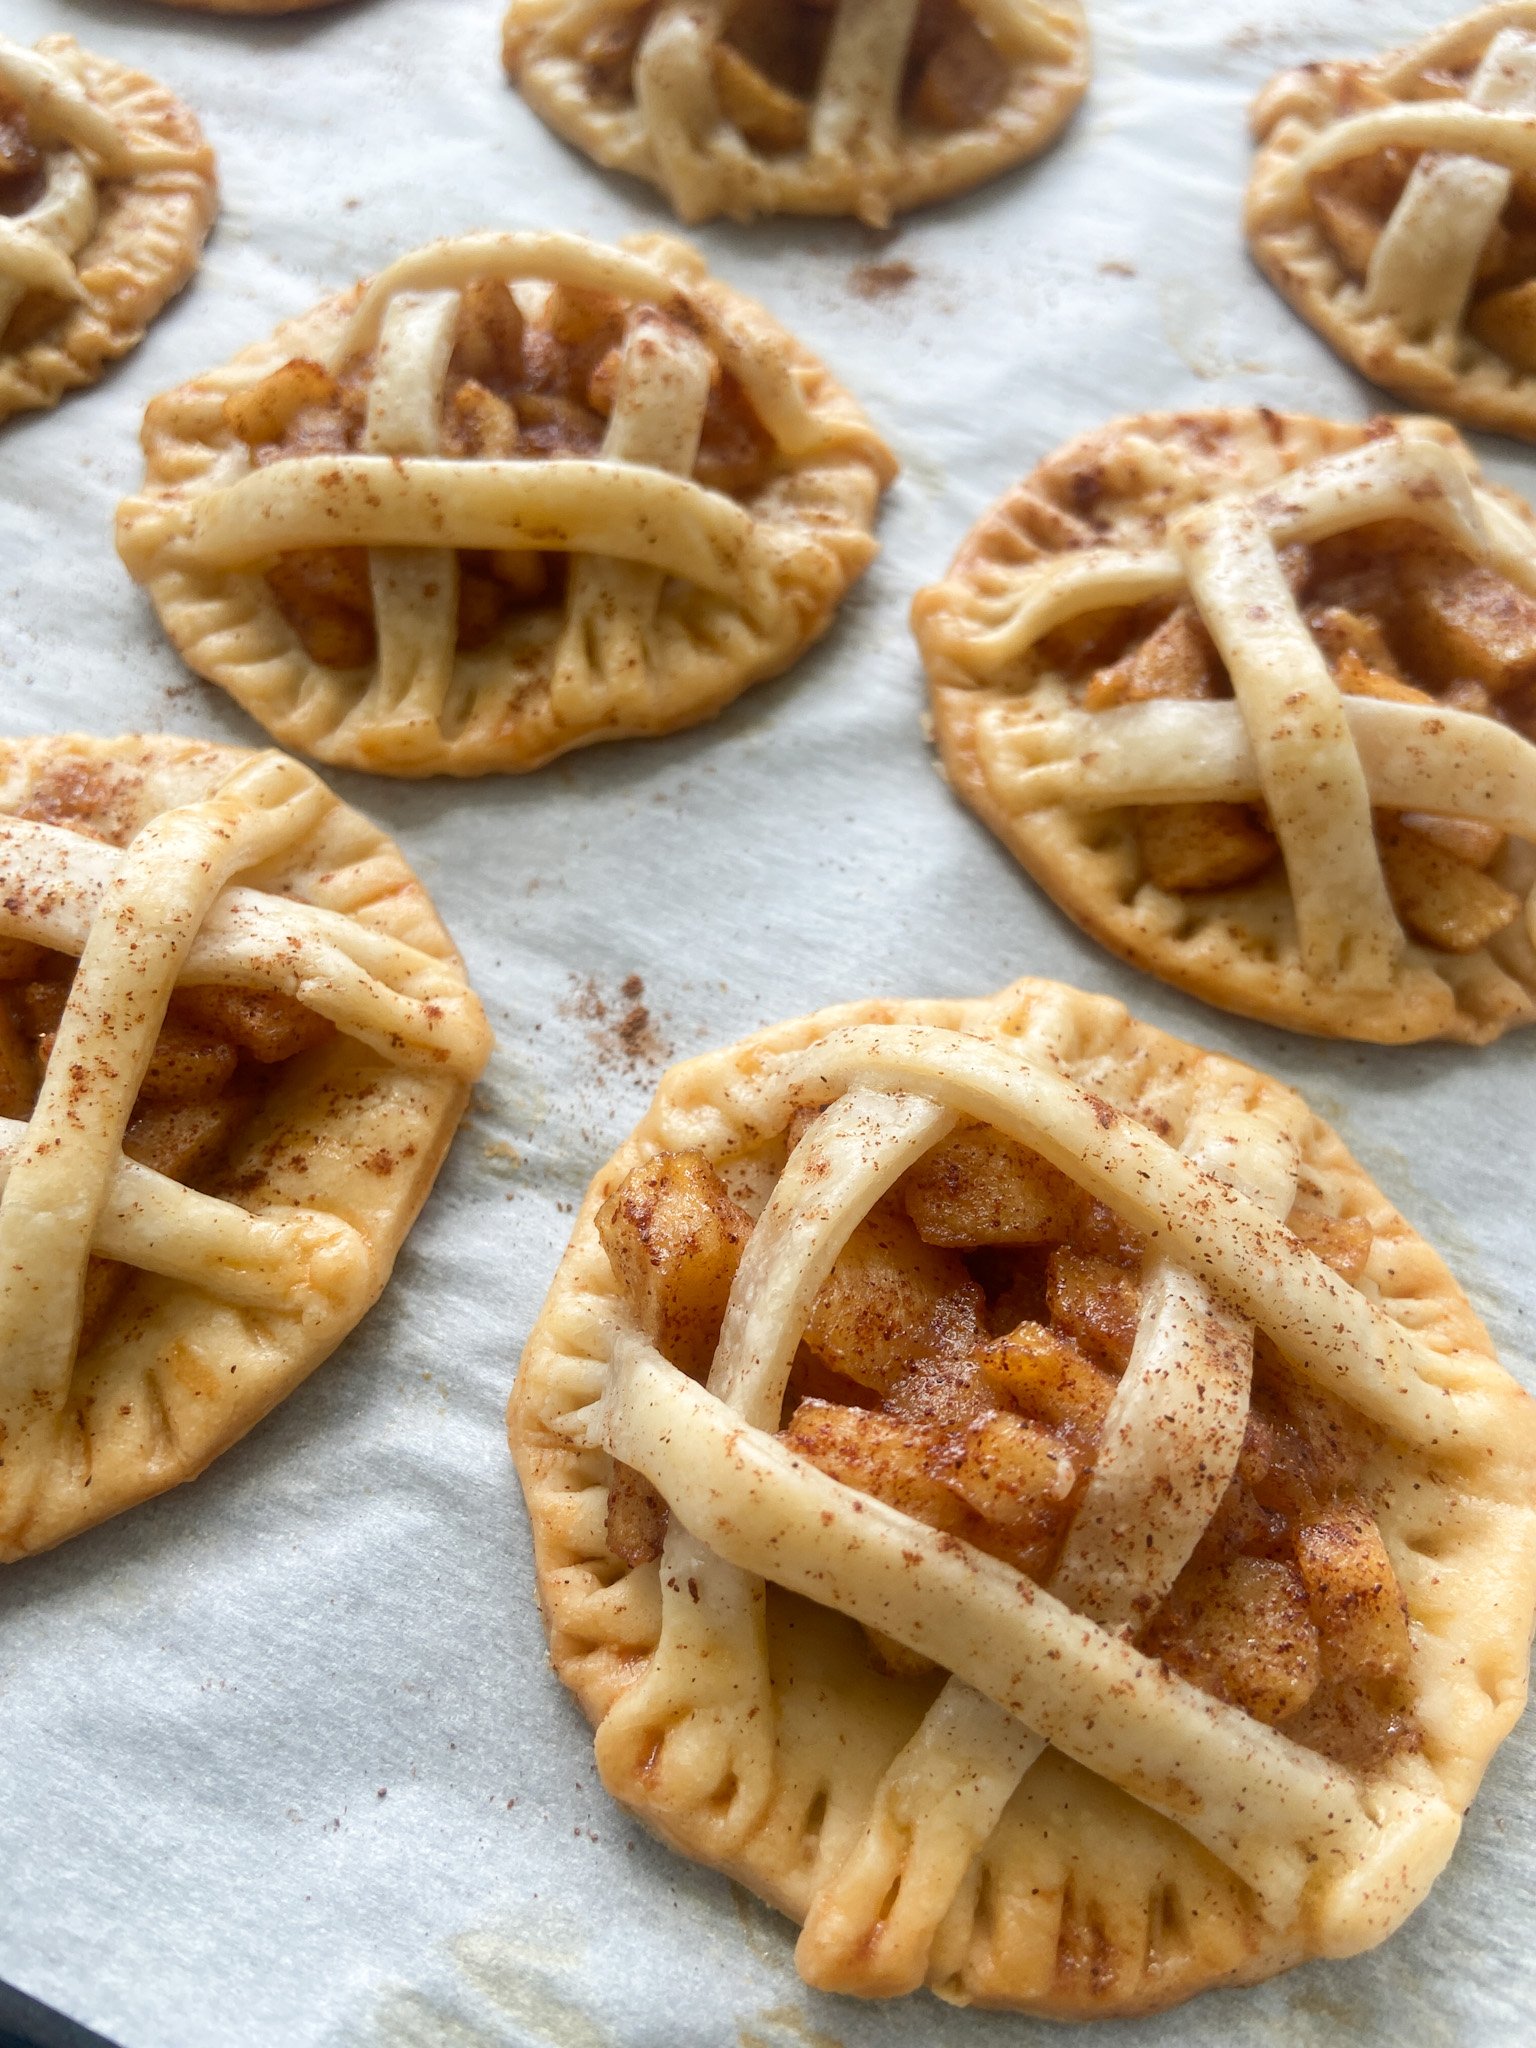 Mini apple pies fresh from oven